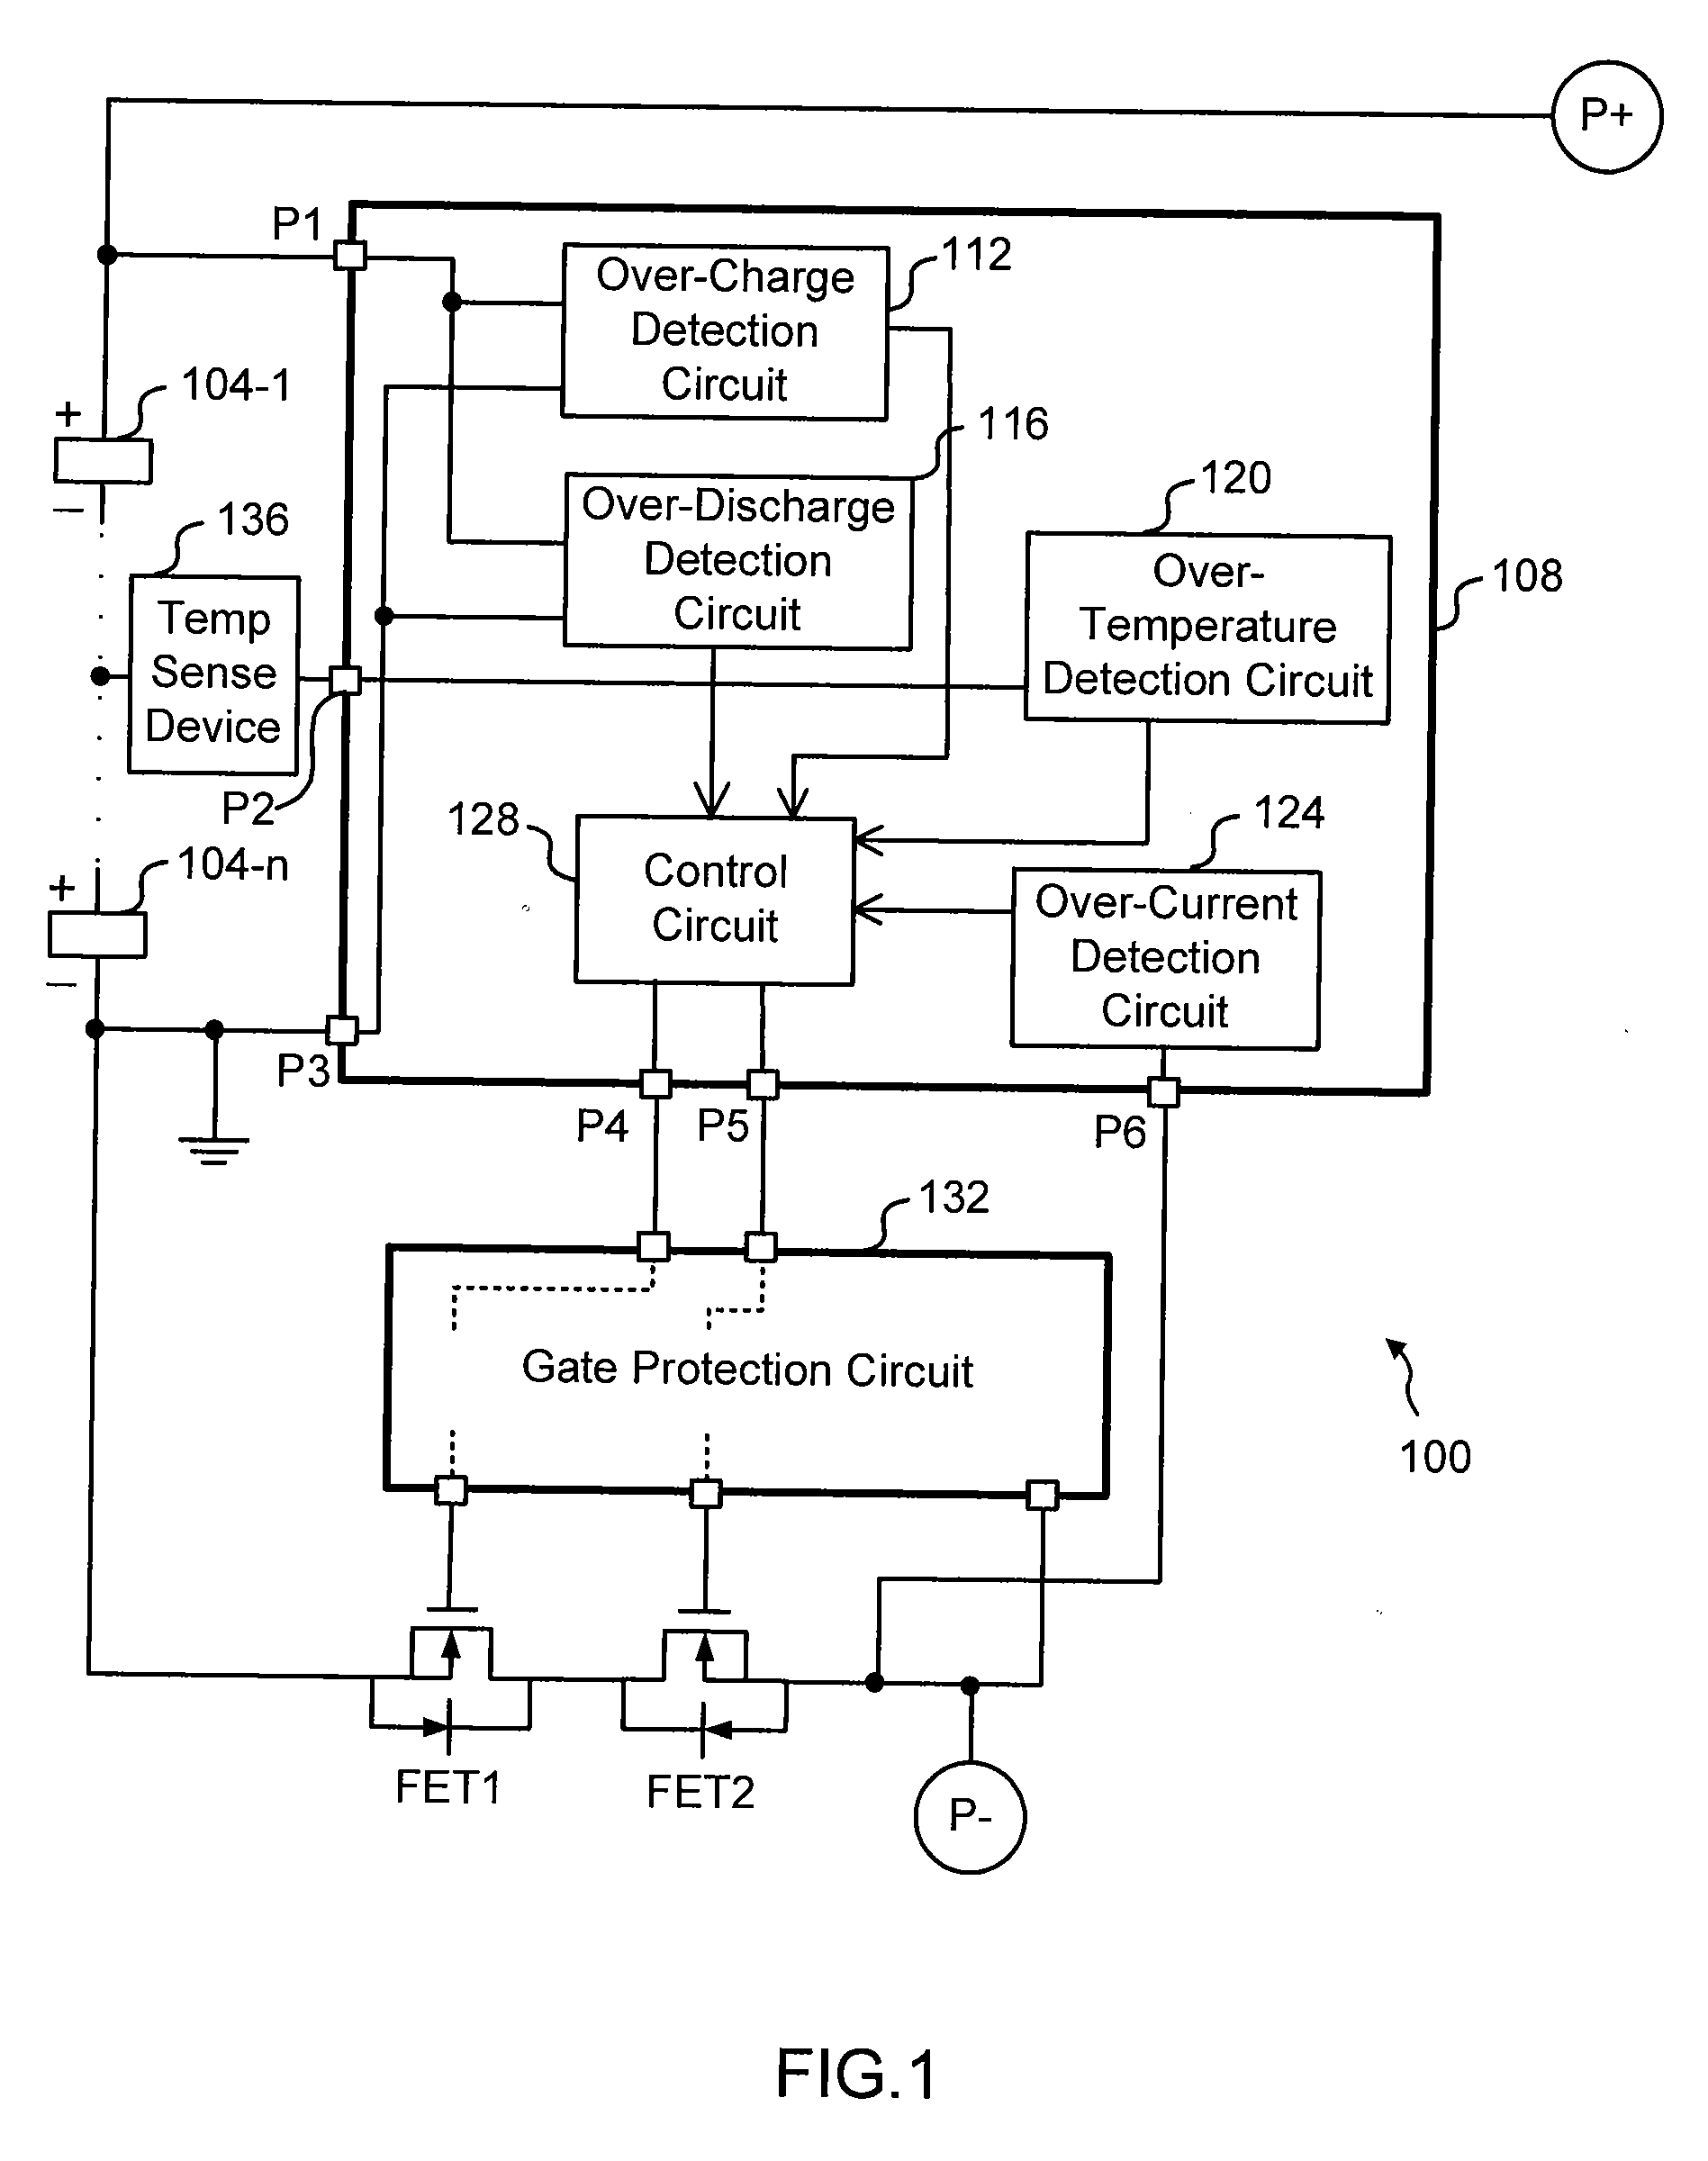 Low side n-channel fet protection circuit